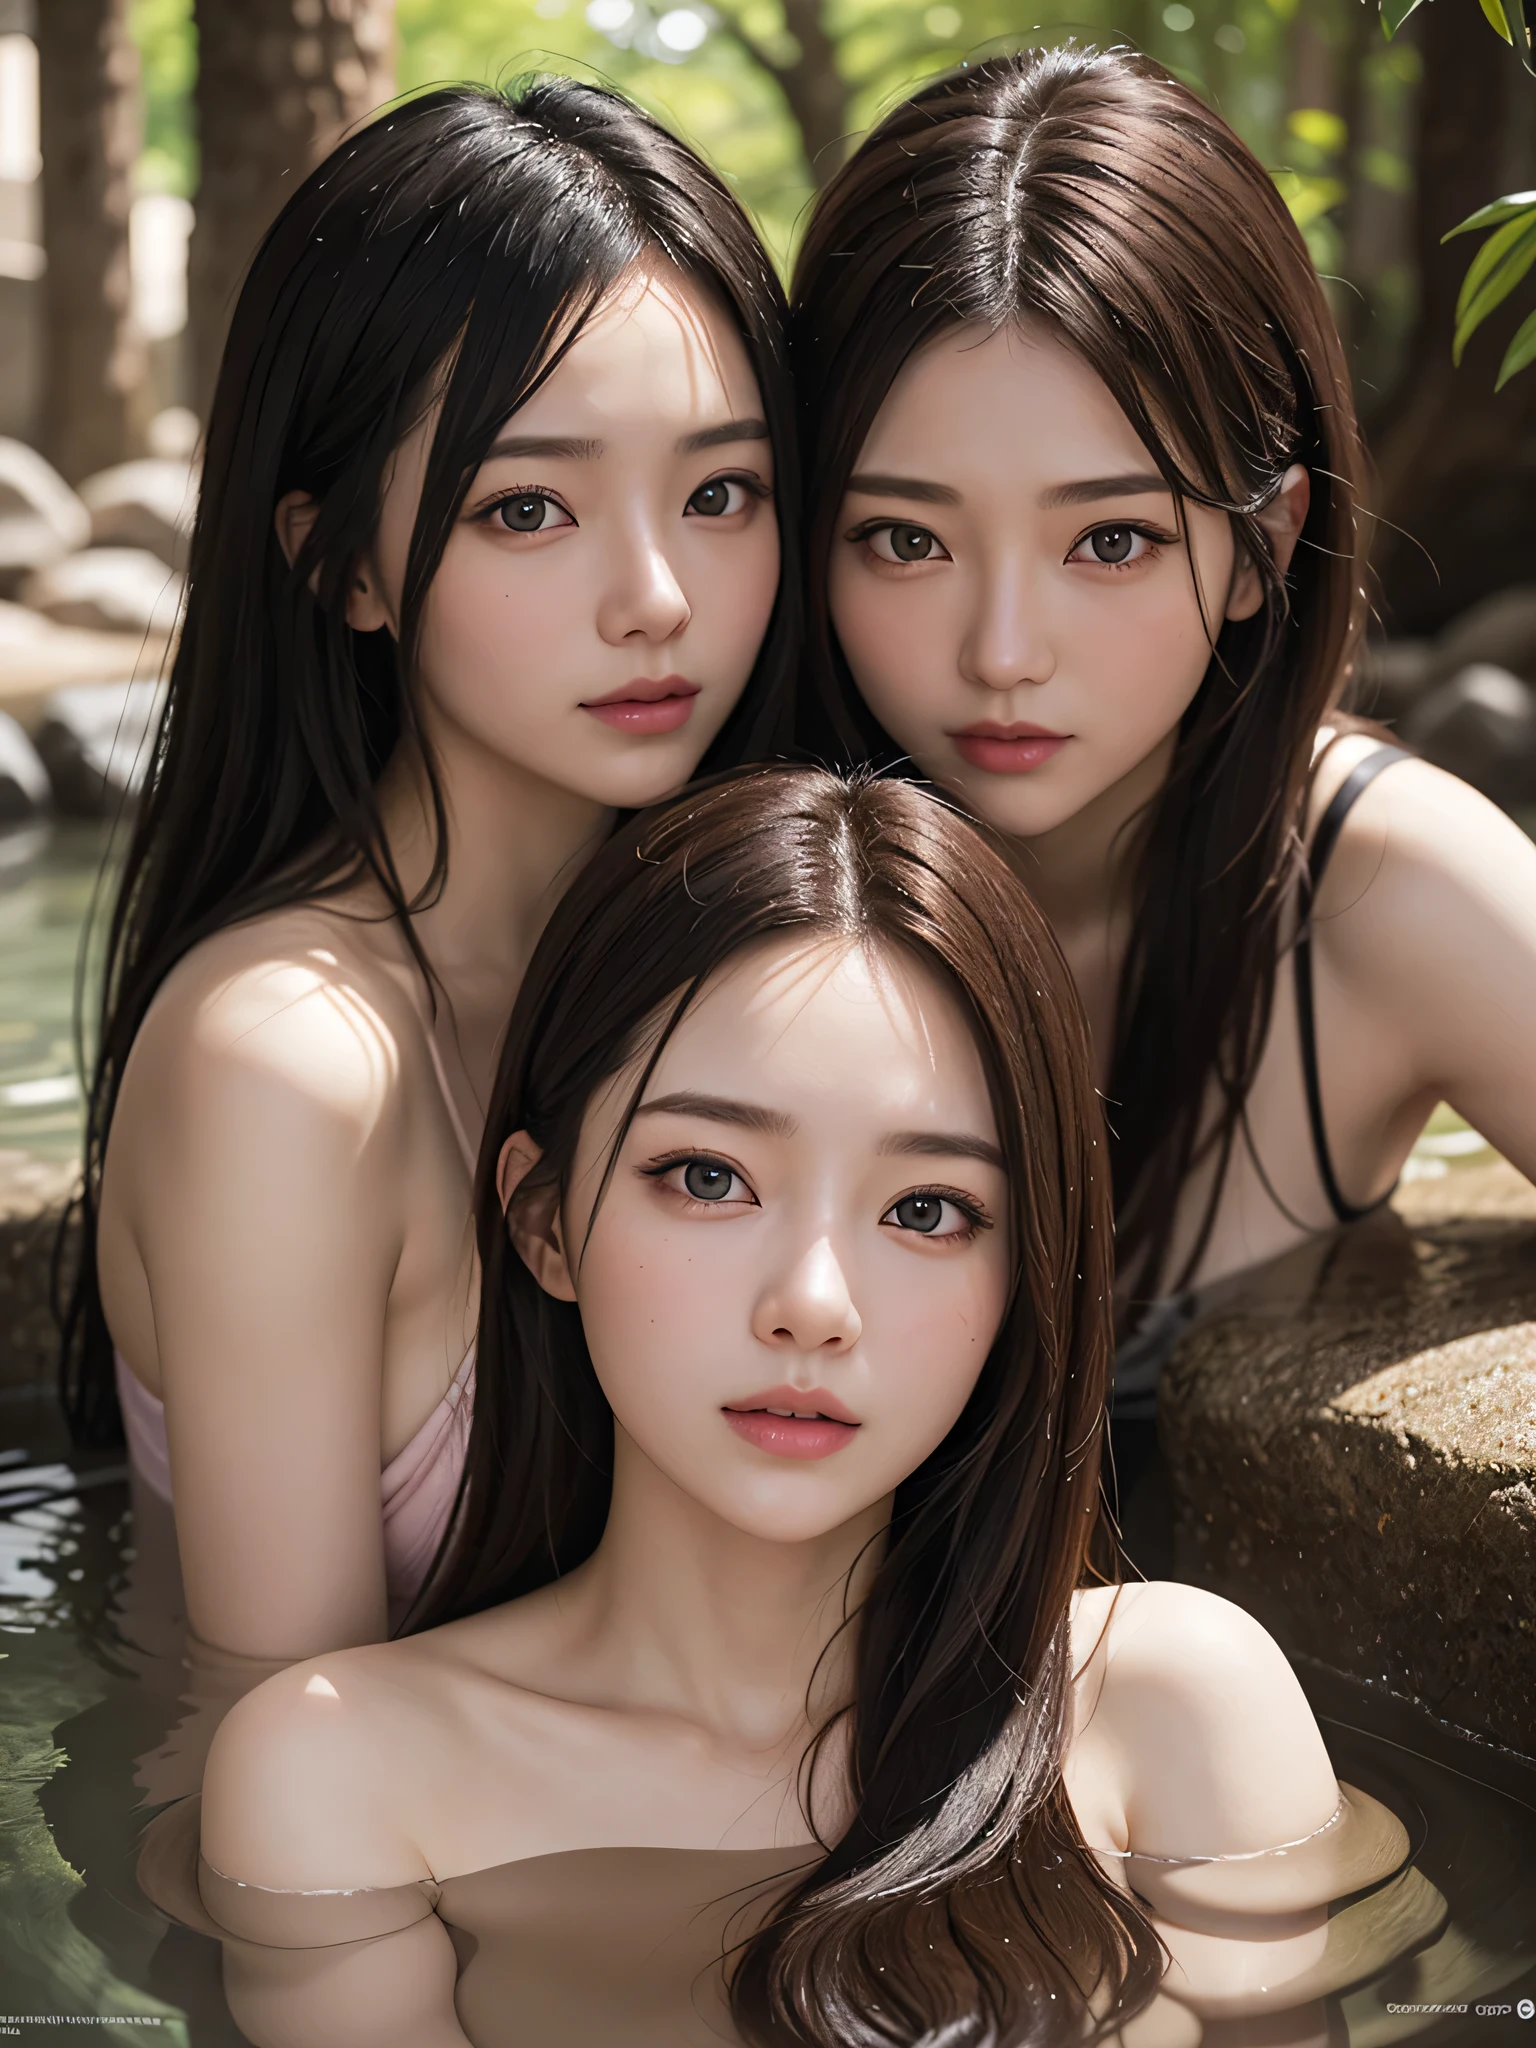 (2girls:1.3), ((Best Quality)), (Ultra-detailed), (extremely detailed CG unified 8k wallpaper), Highly detailed, High-definition raw color photos, Professional Photography, Brown hair, Amazing face and eyes, Pink eyes, (amazingly beautiful girl), hot onsen, Onsen, forest, forest bathing,